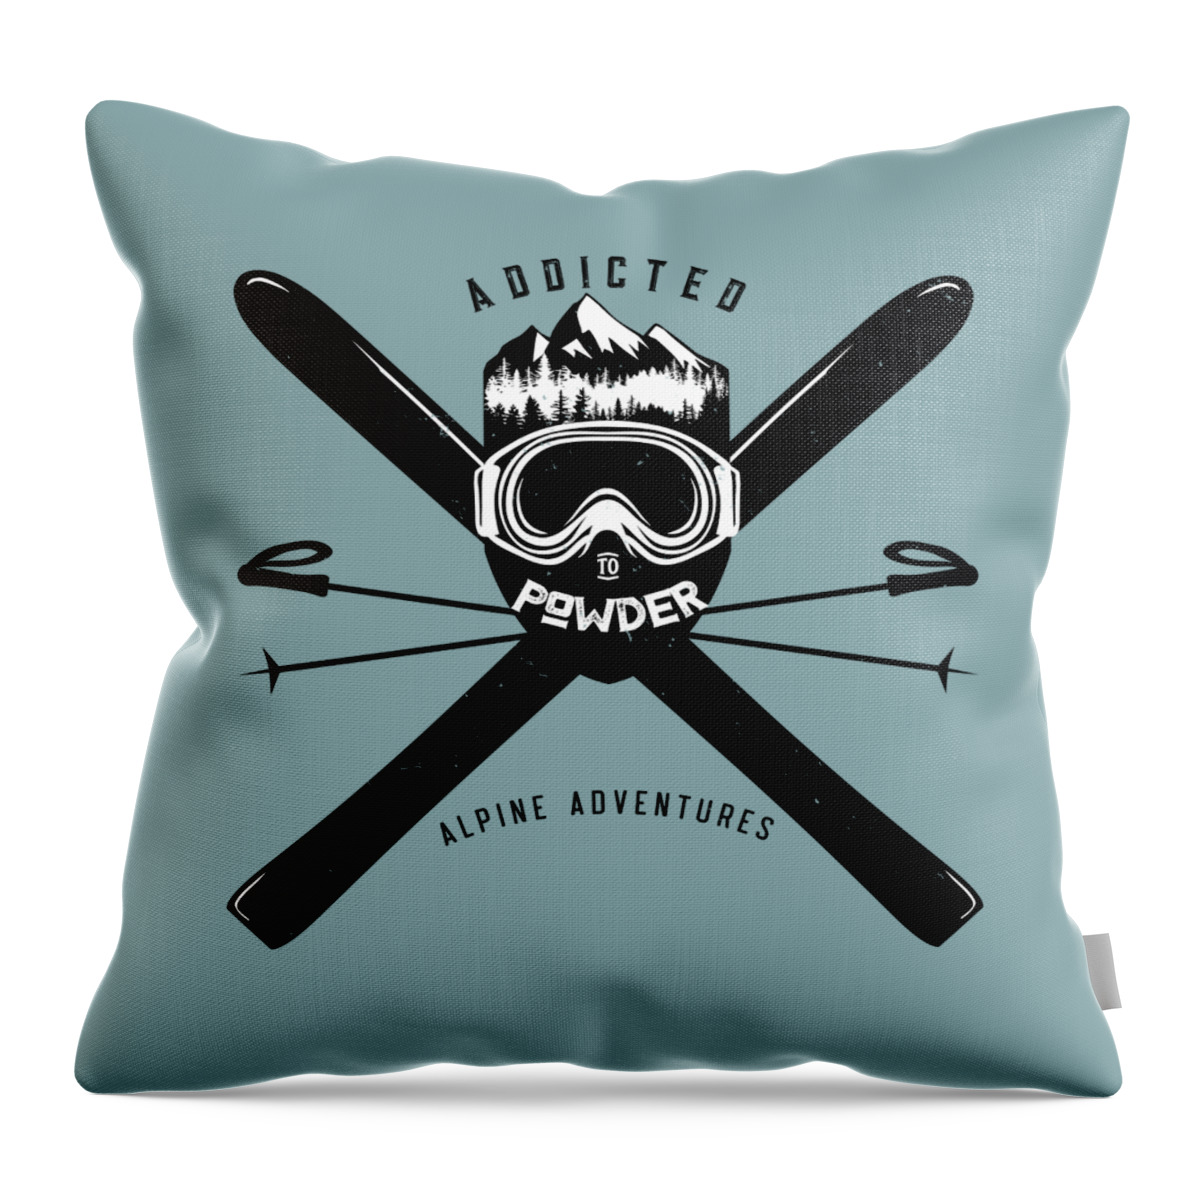 Distressed Ski Badge Throw Pillow featuring the painting Addicted to Powder ski Badge by Sassan Filsoof